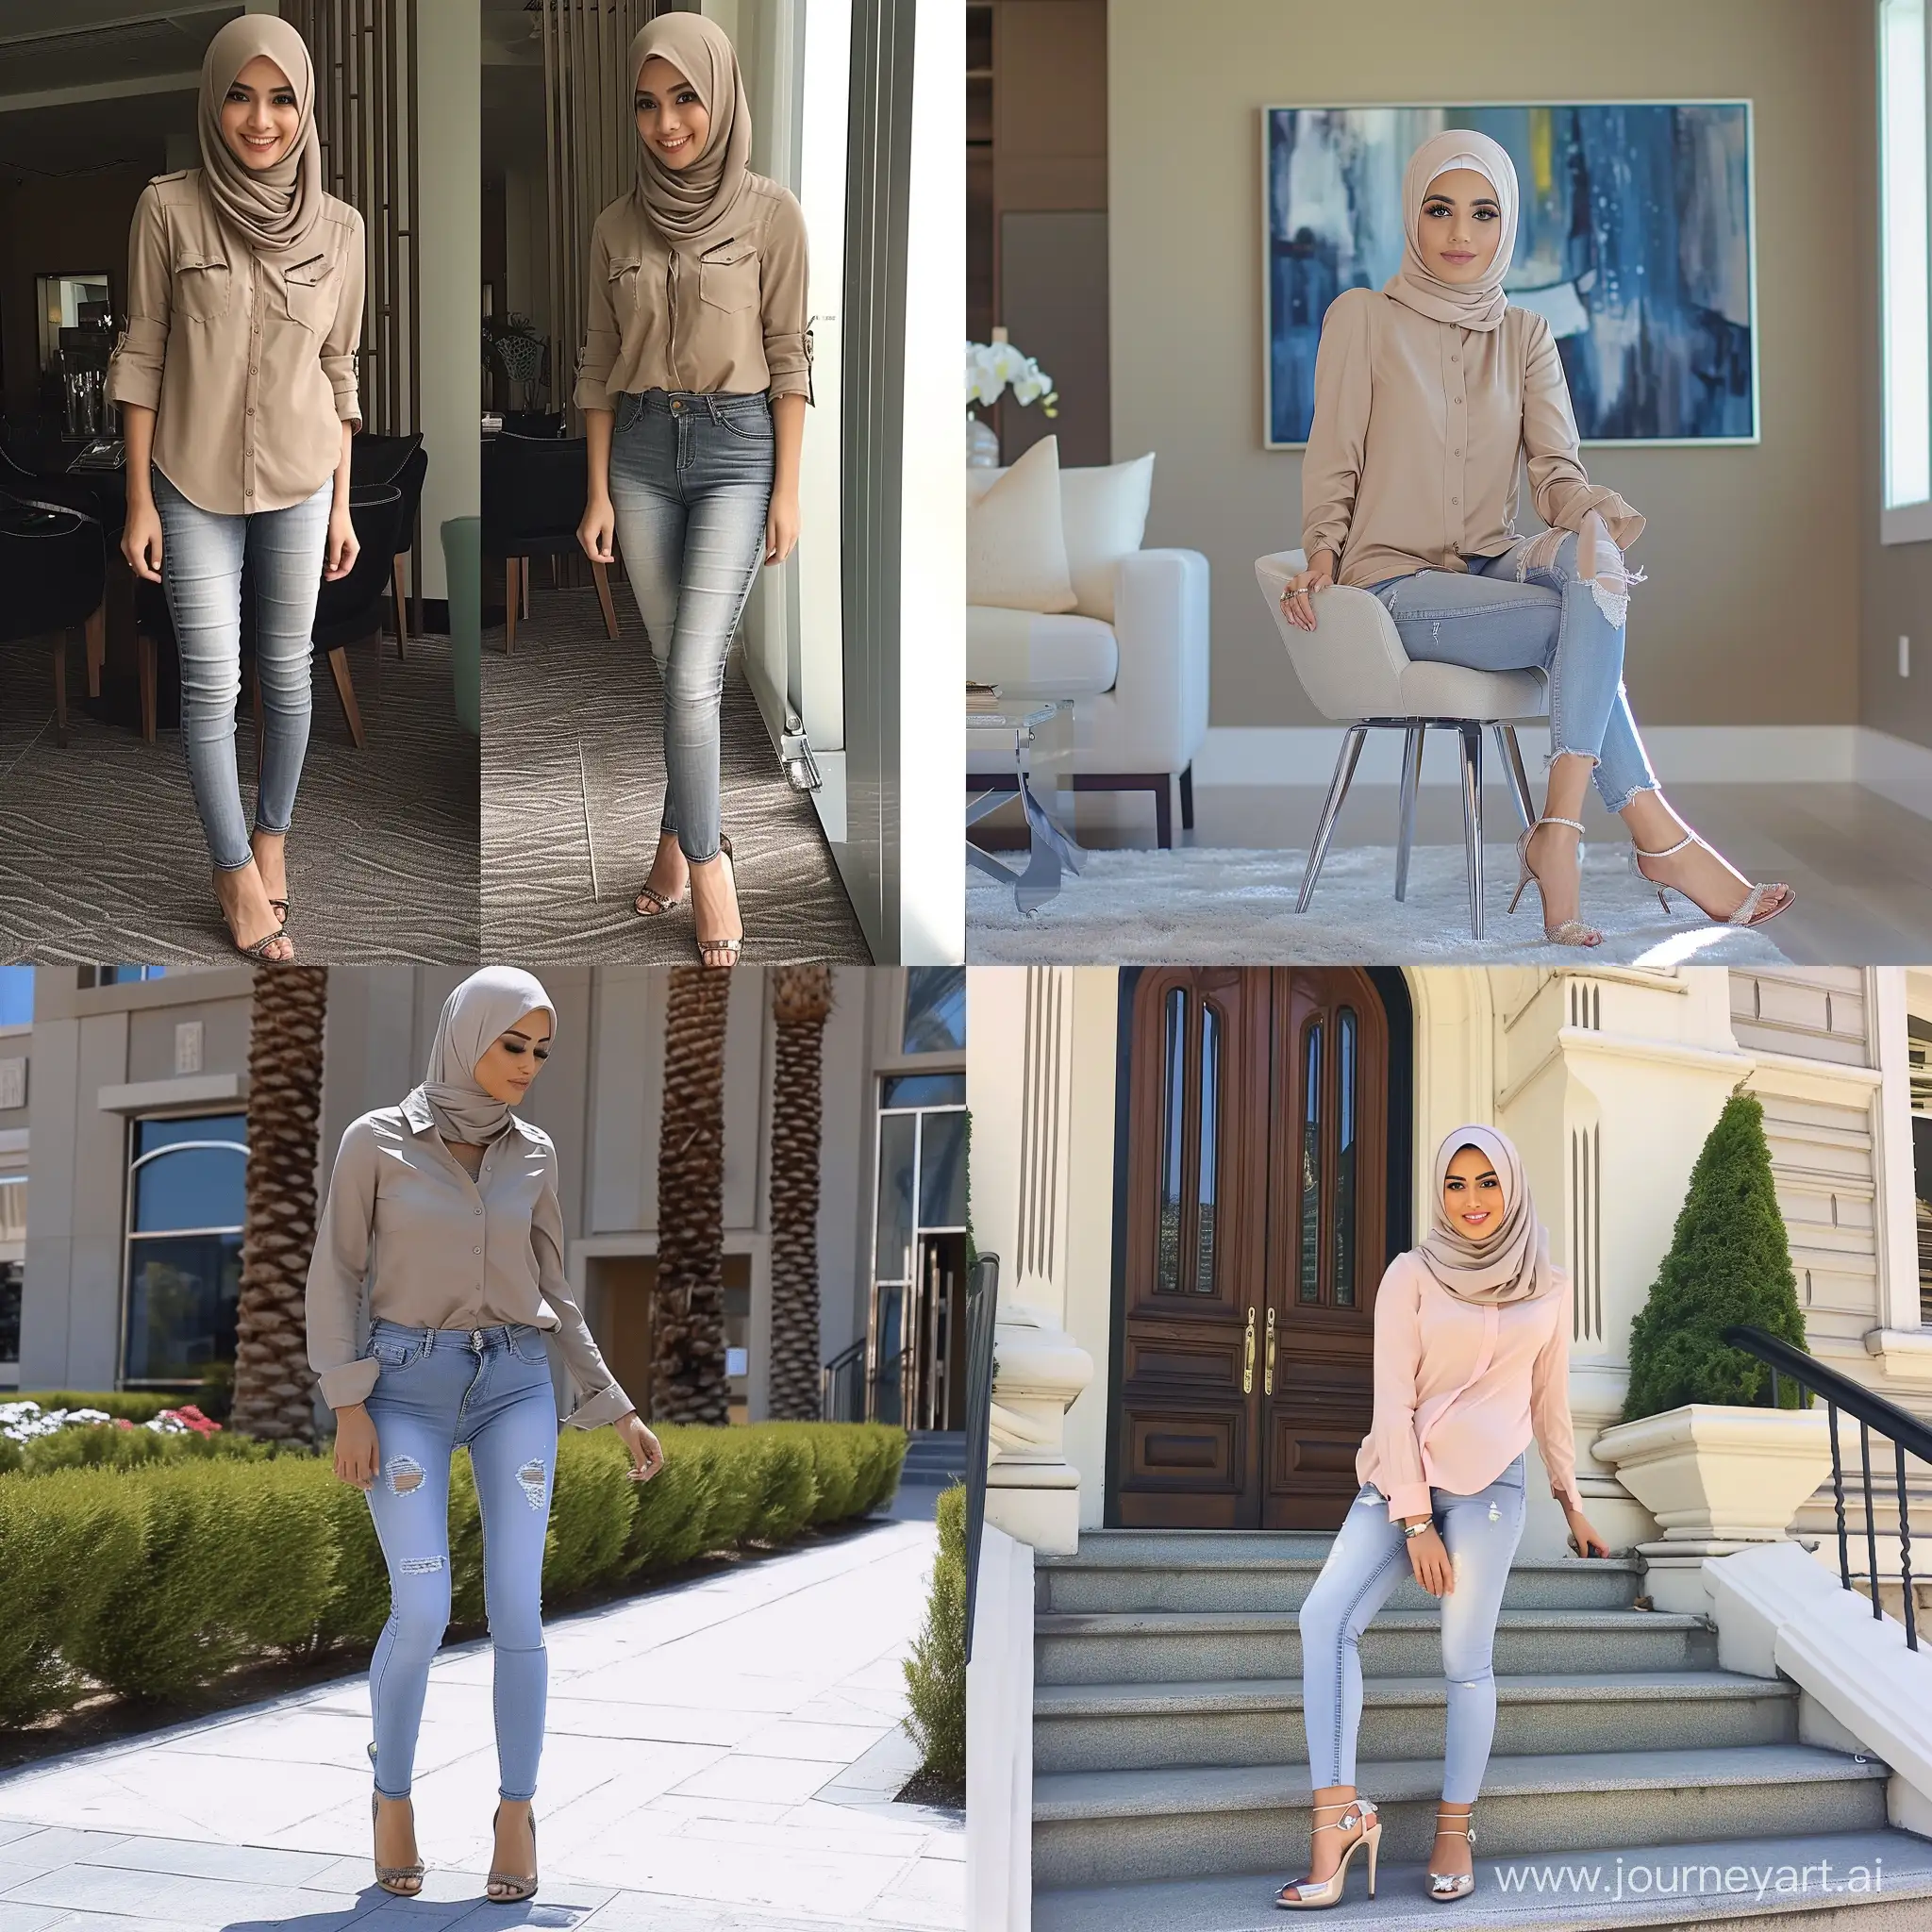 a pretty lady hijabi wearing skinny shirt and skinny jeans and heels